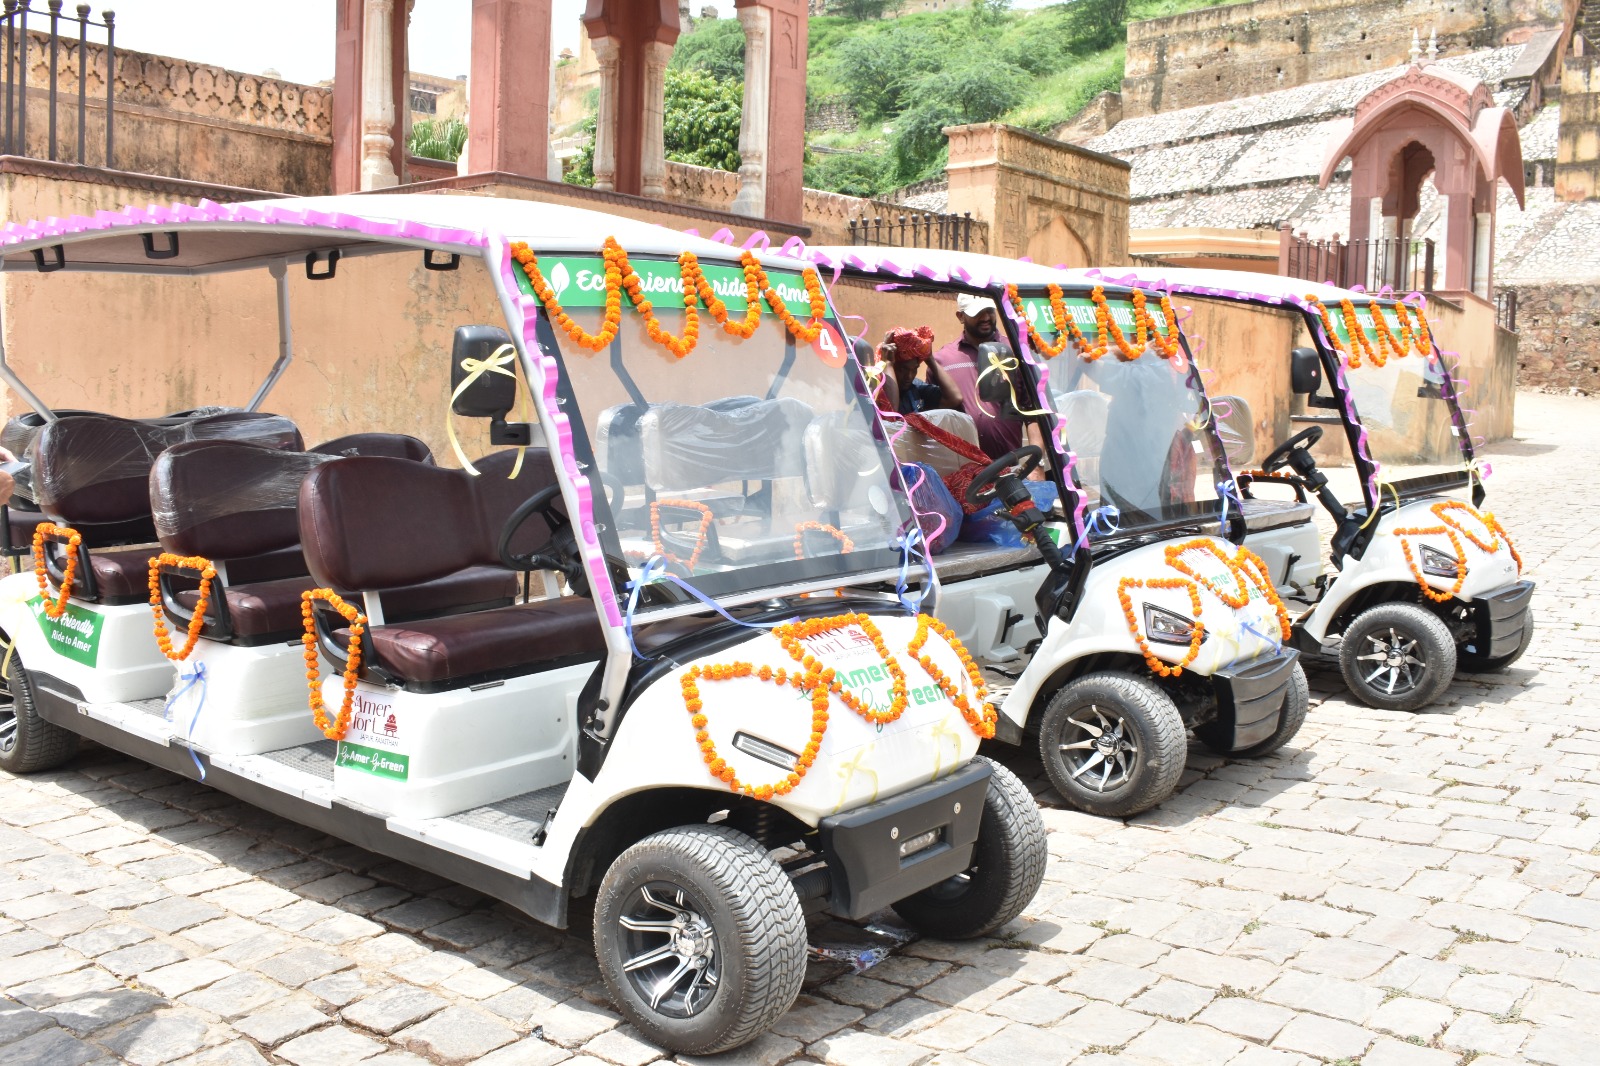 CABINET MINISTER MAHESH JOSHI LAUNCHES E-VEHICLES AT AMBER FORT